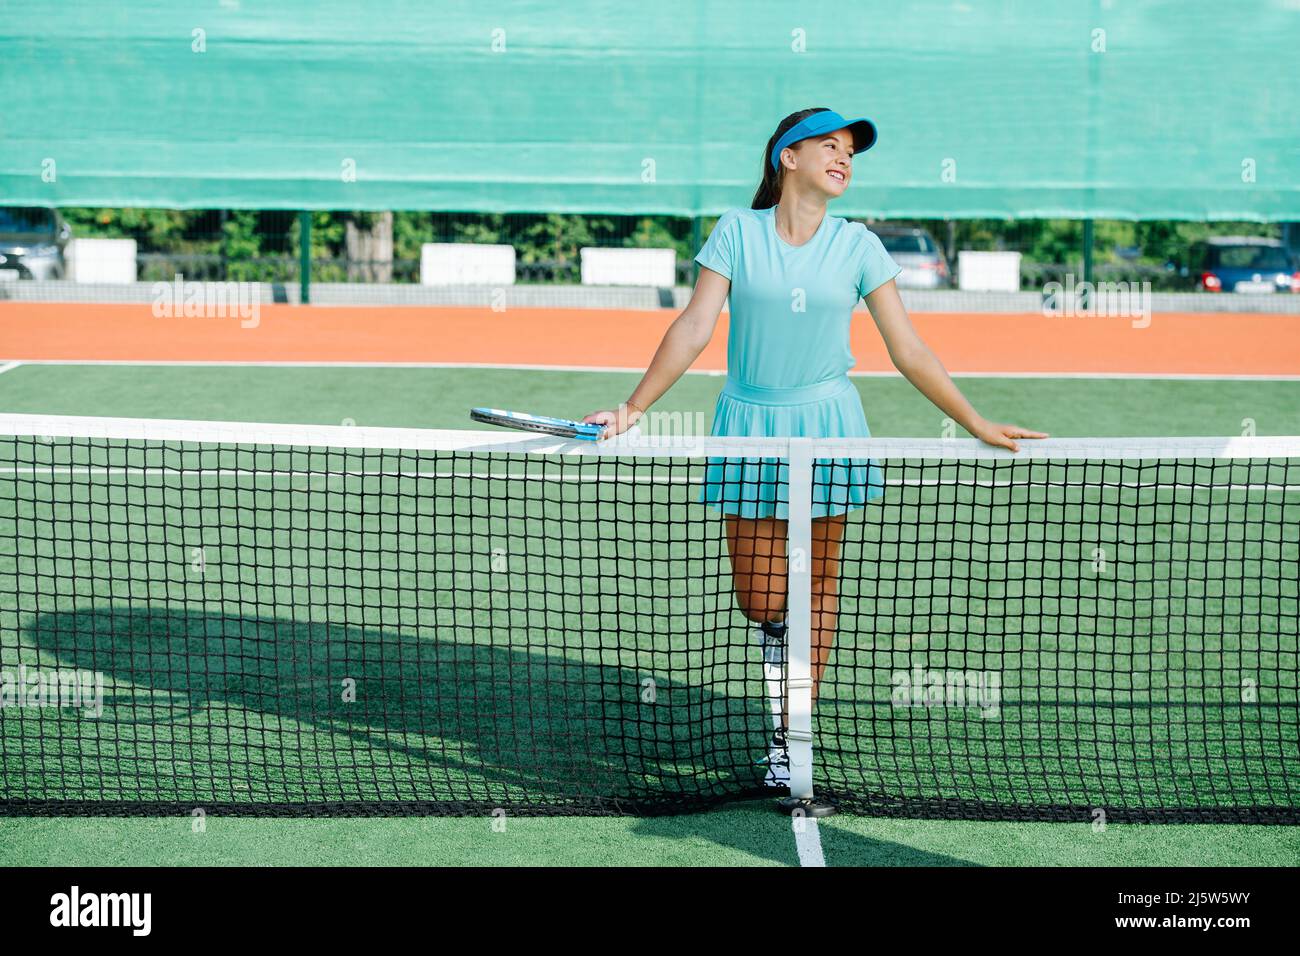 Smiley girl leaning on a tennis court net in a light blue sportswear. Looking to the side, posing. Lit with evening sunlight. Stock Photo